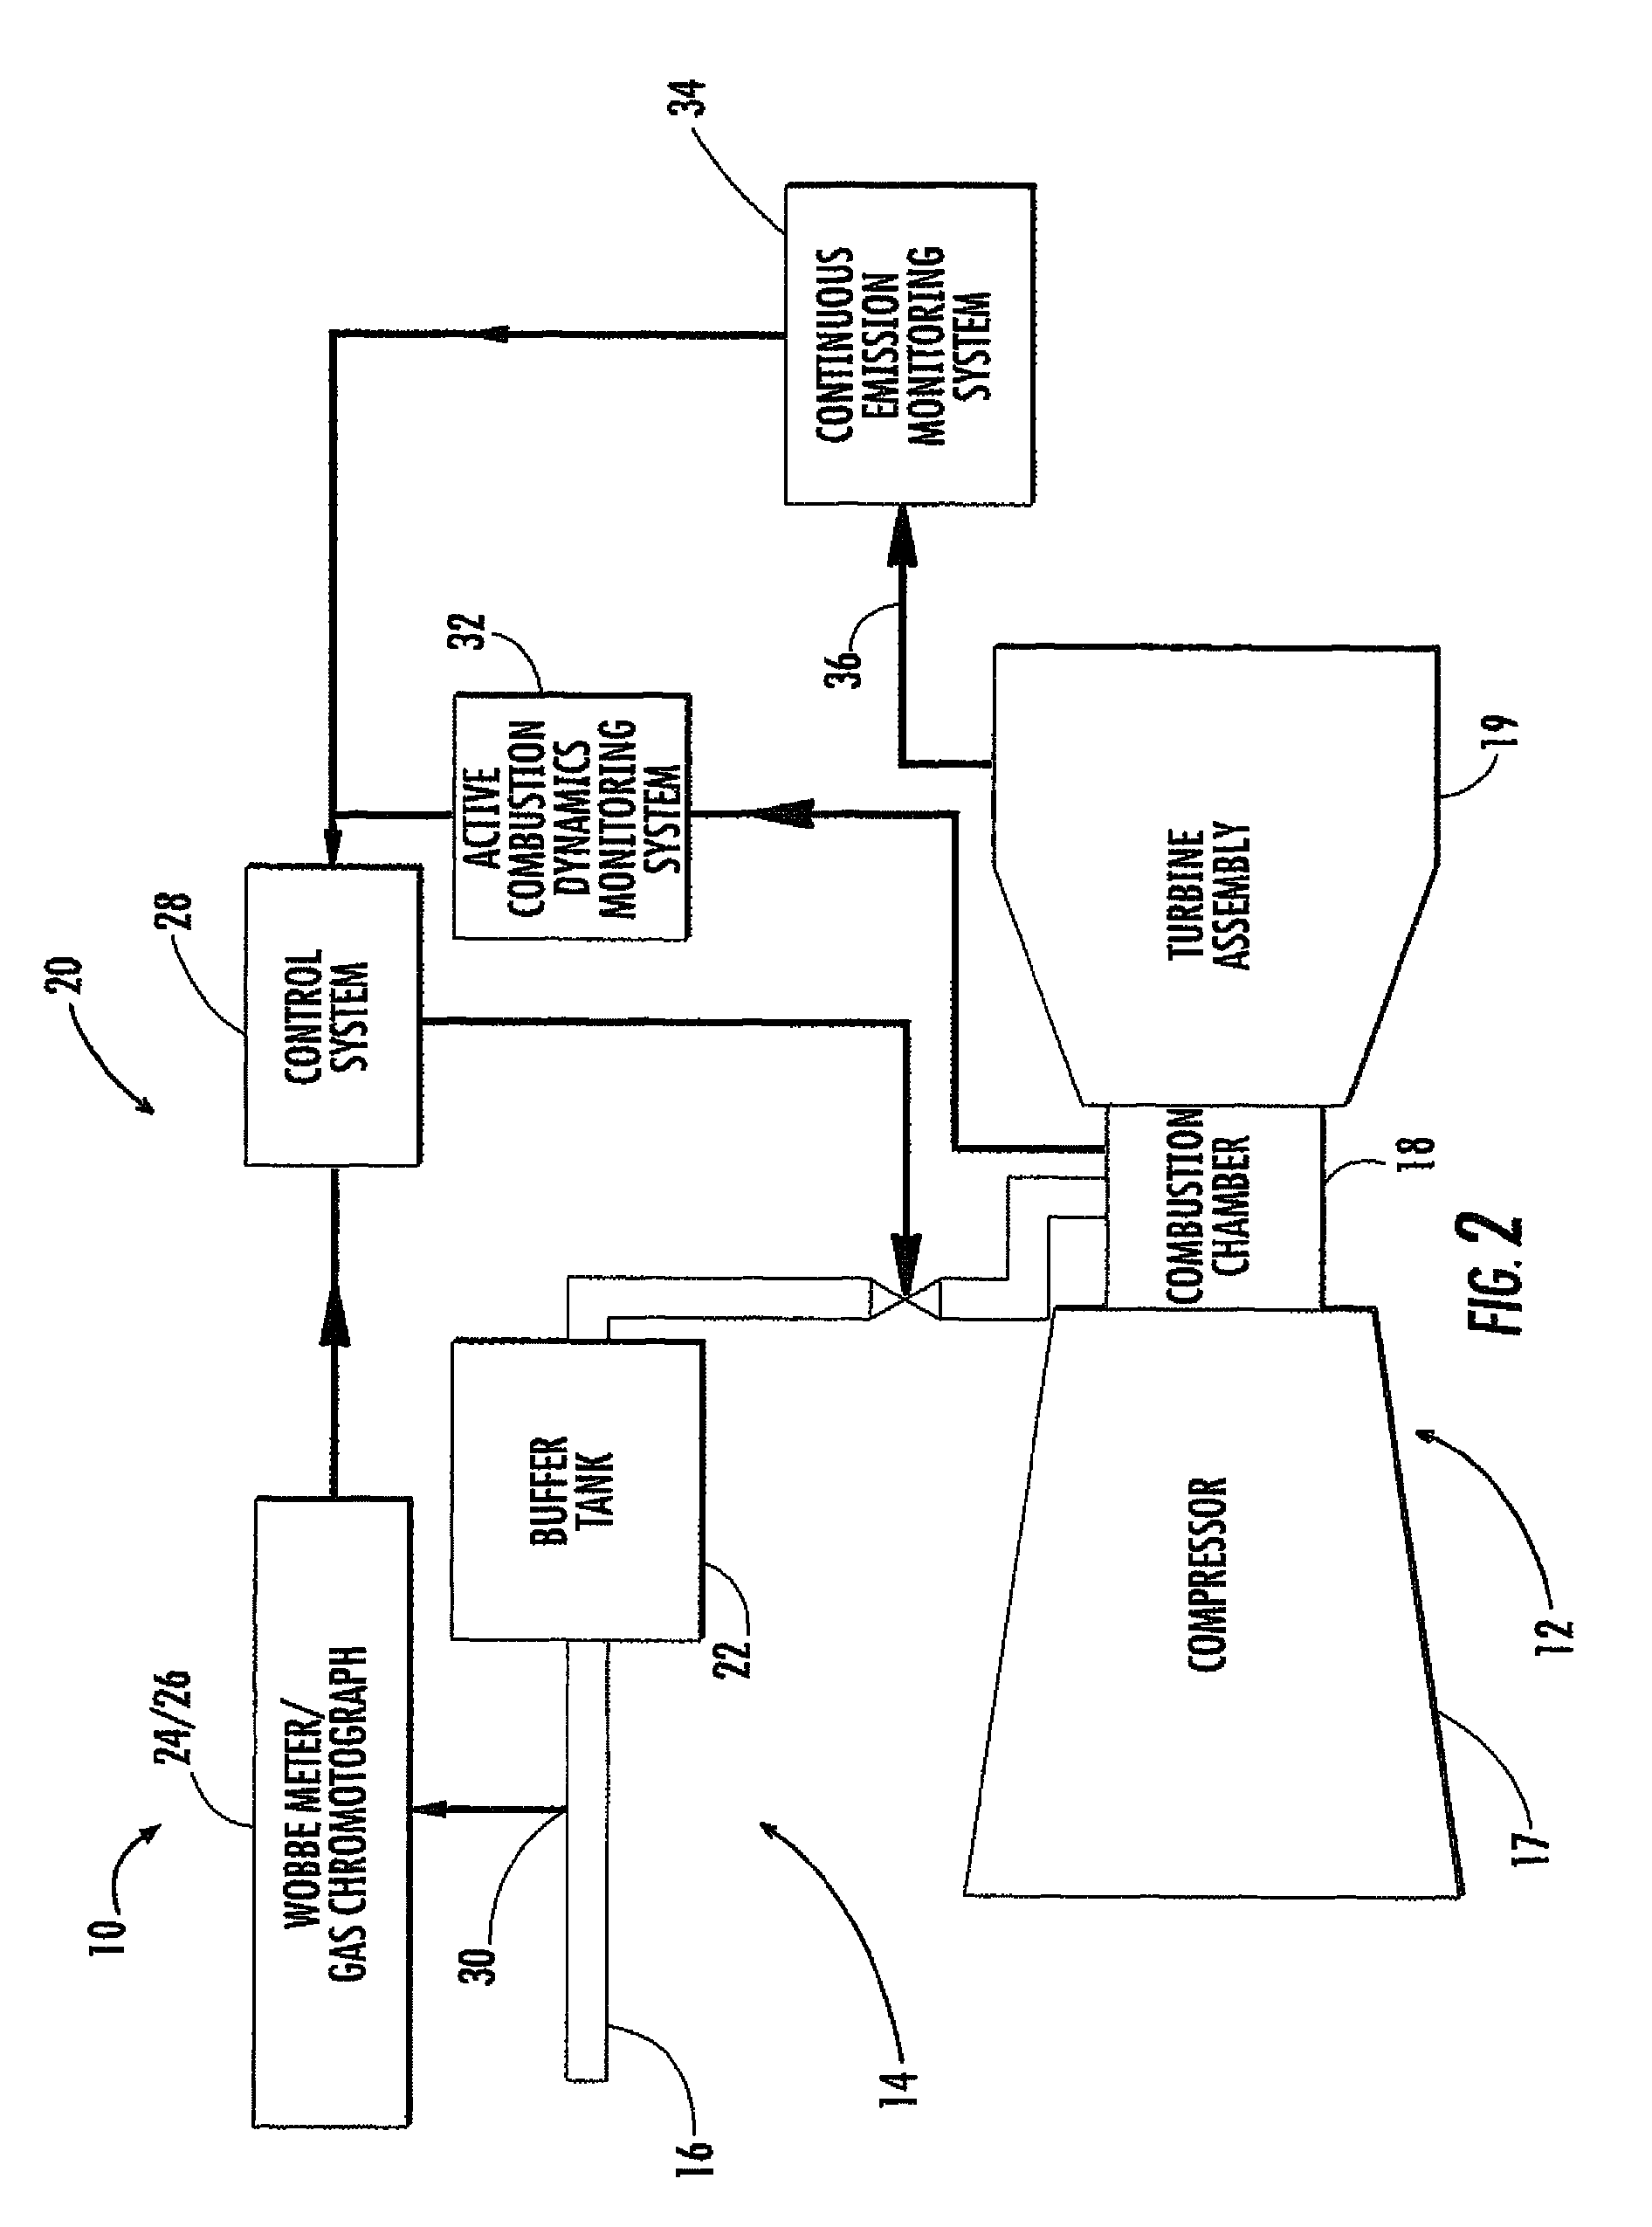 Integrated fuel gas characterization system